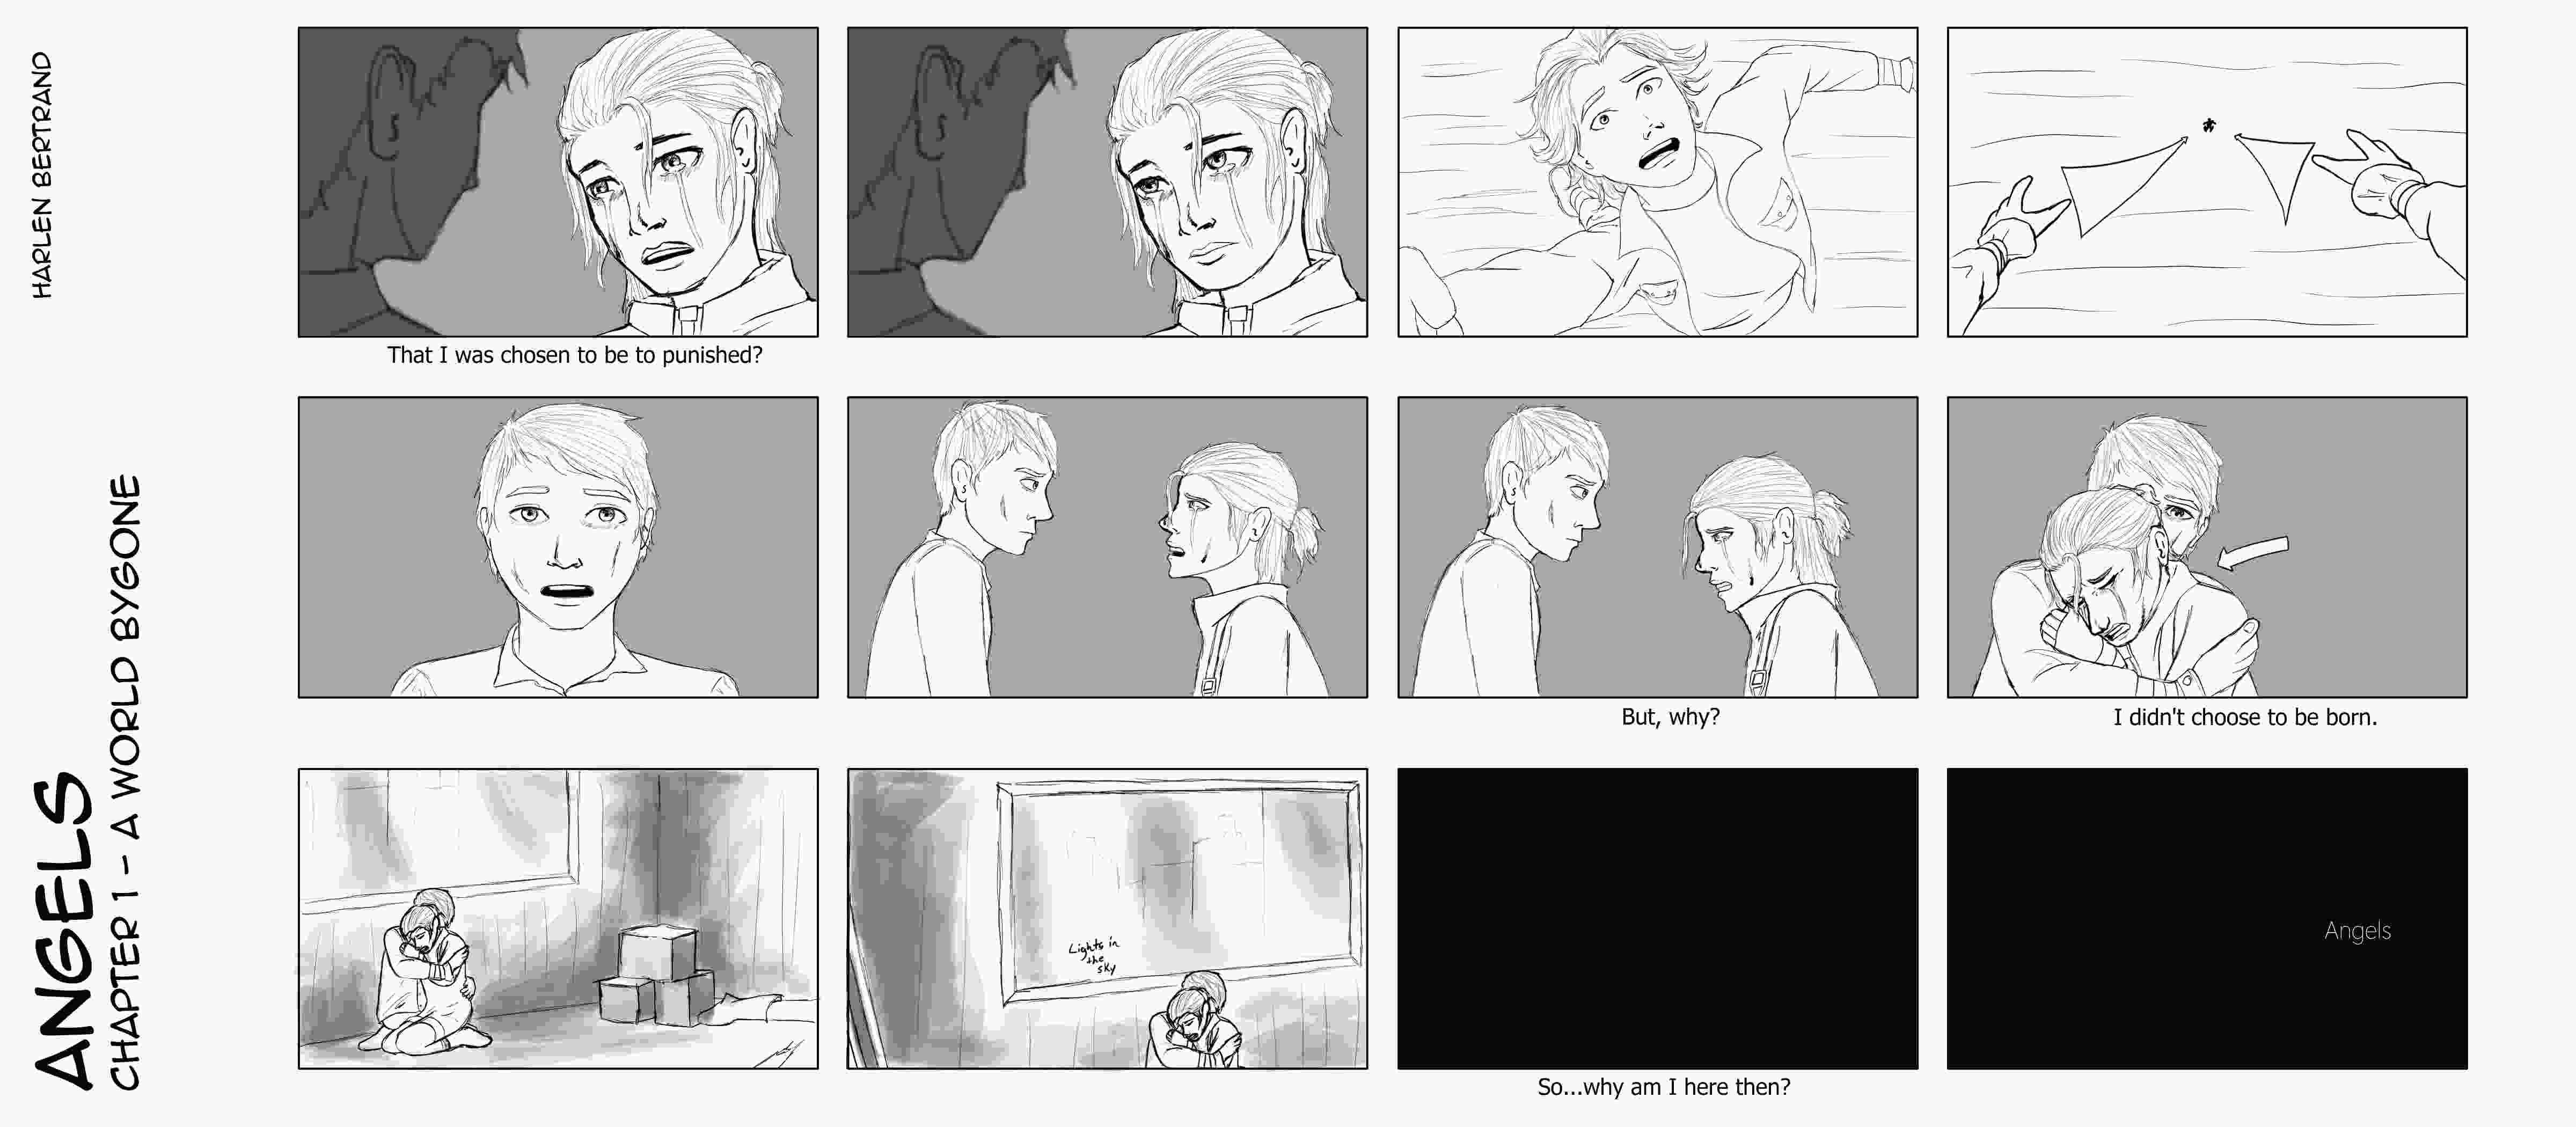 Page 5 of the Angels Storyboard